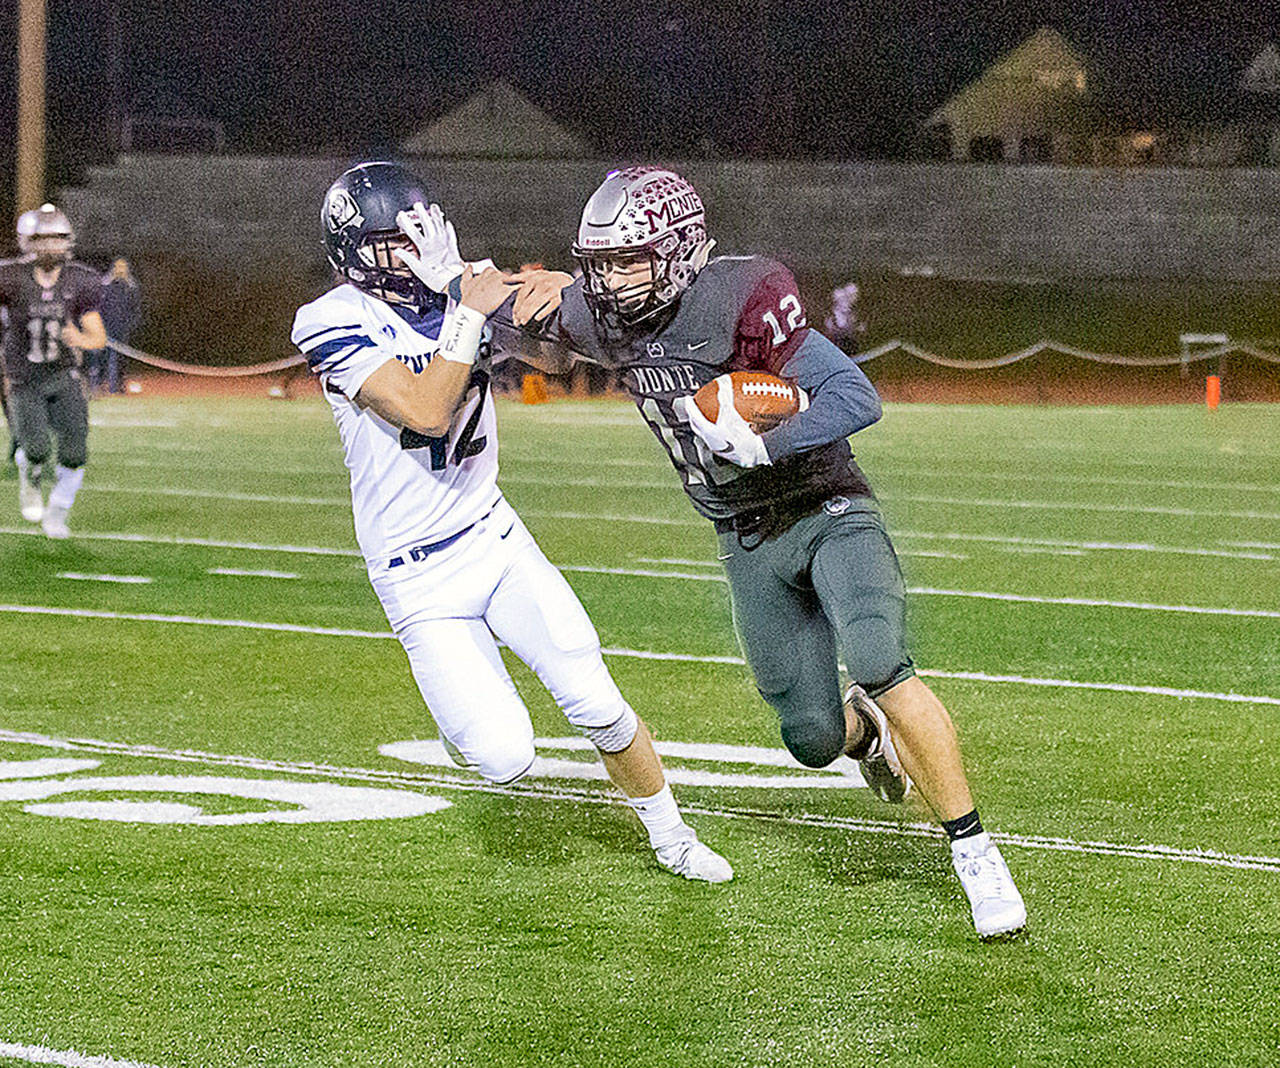 Montesano wide receiver Sam Winter (12), seen here in a game against King’s Way Christian on Nov. 8, had 133 receiving yards and four touchdowns in a 1A State Tournament victory over Meridian last week. Winter and Montesano will host Deer Park in the quarterfinal round at 2 p.m. on Saturday. (Photo by Shawn Donnelly)